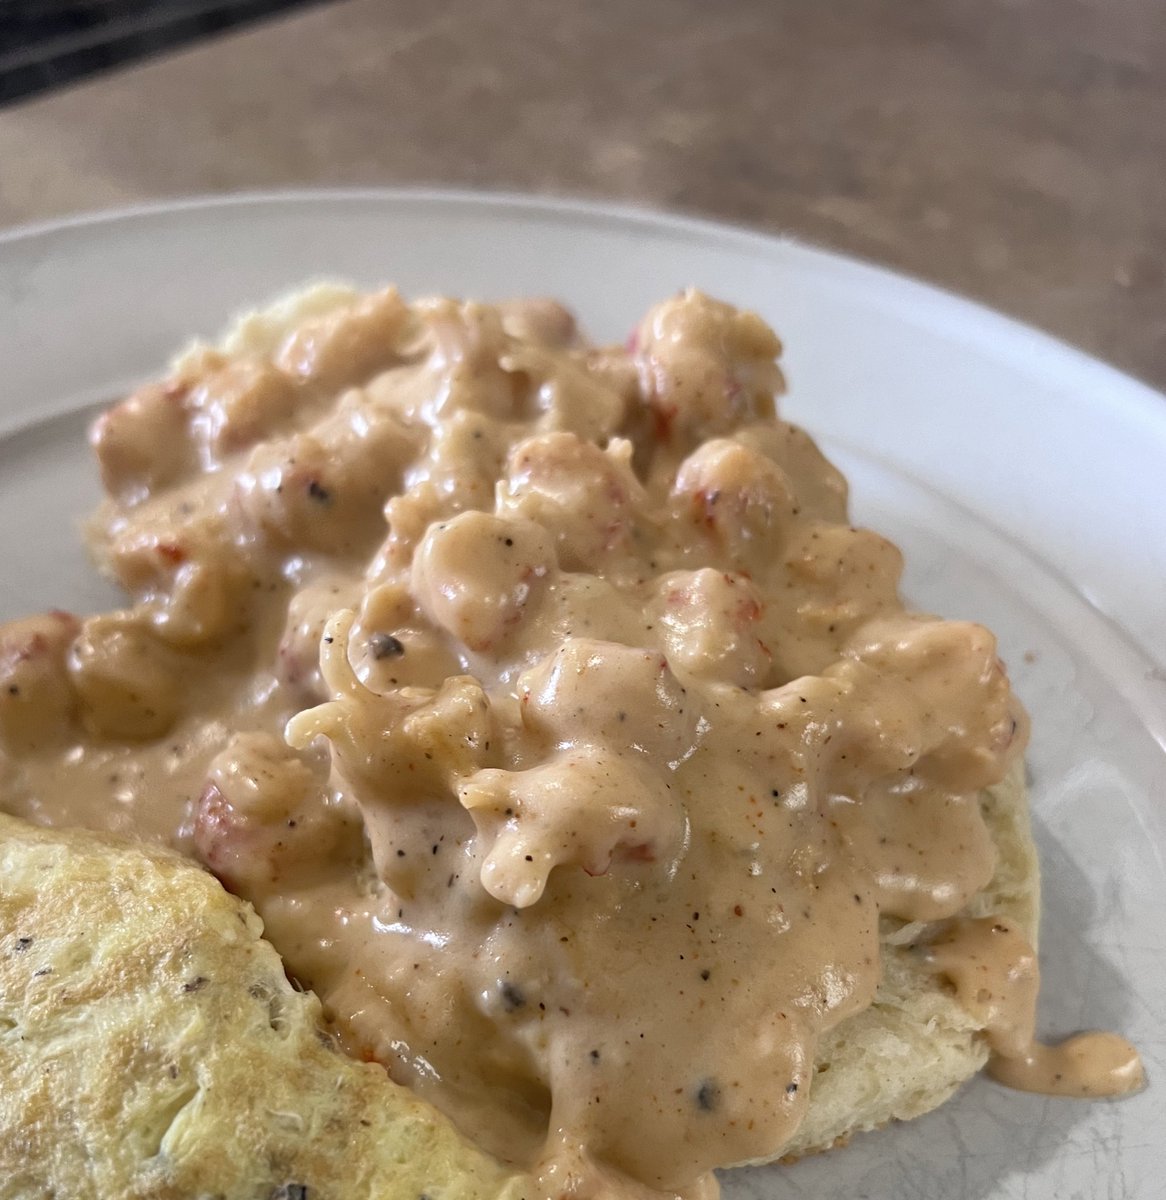 Biscuits and crawfish gravy Okay.. I couldn’t get the best picture of it plated and I was hungry, so this the best y’all getting today 😂 This recipe been in my head for a few years and I decided to give it a try today. Bitch I wanna kiss myself right now😩